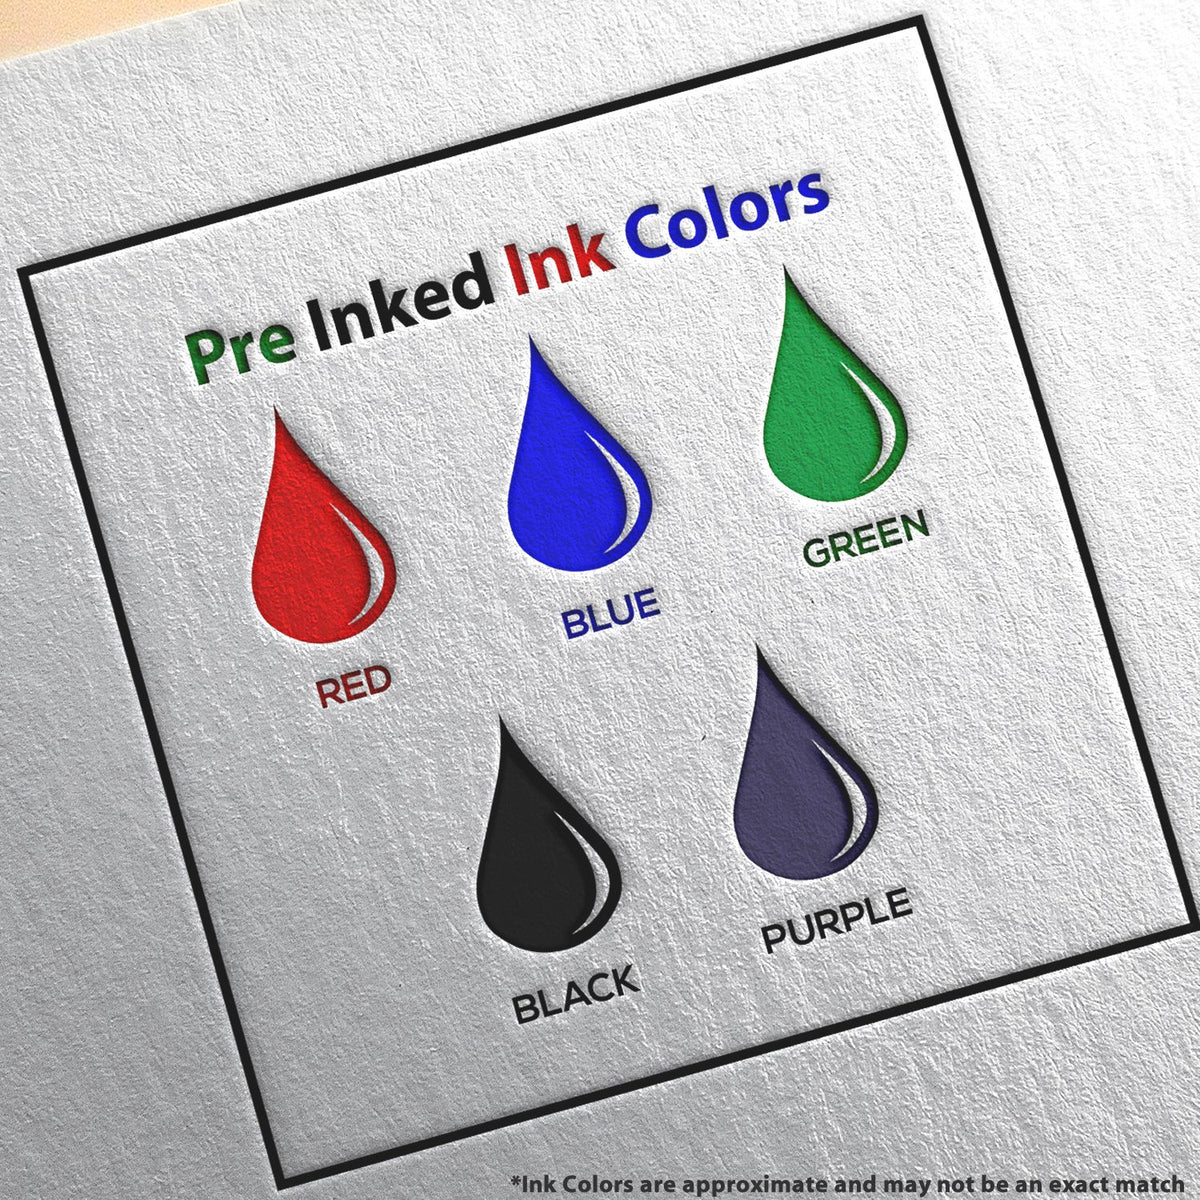 A picture showing the different ink colors or hues available for the MaxLight Premium Pre-Inked New York State Seal Notarial Stamp product.